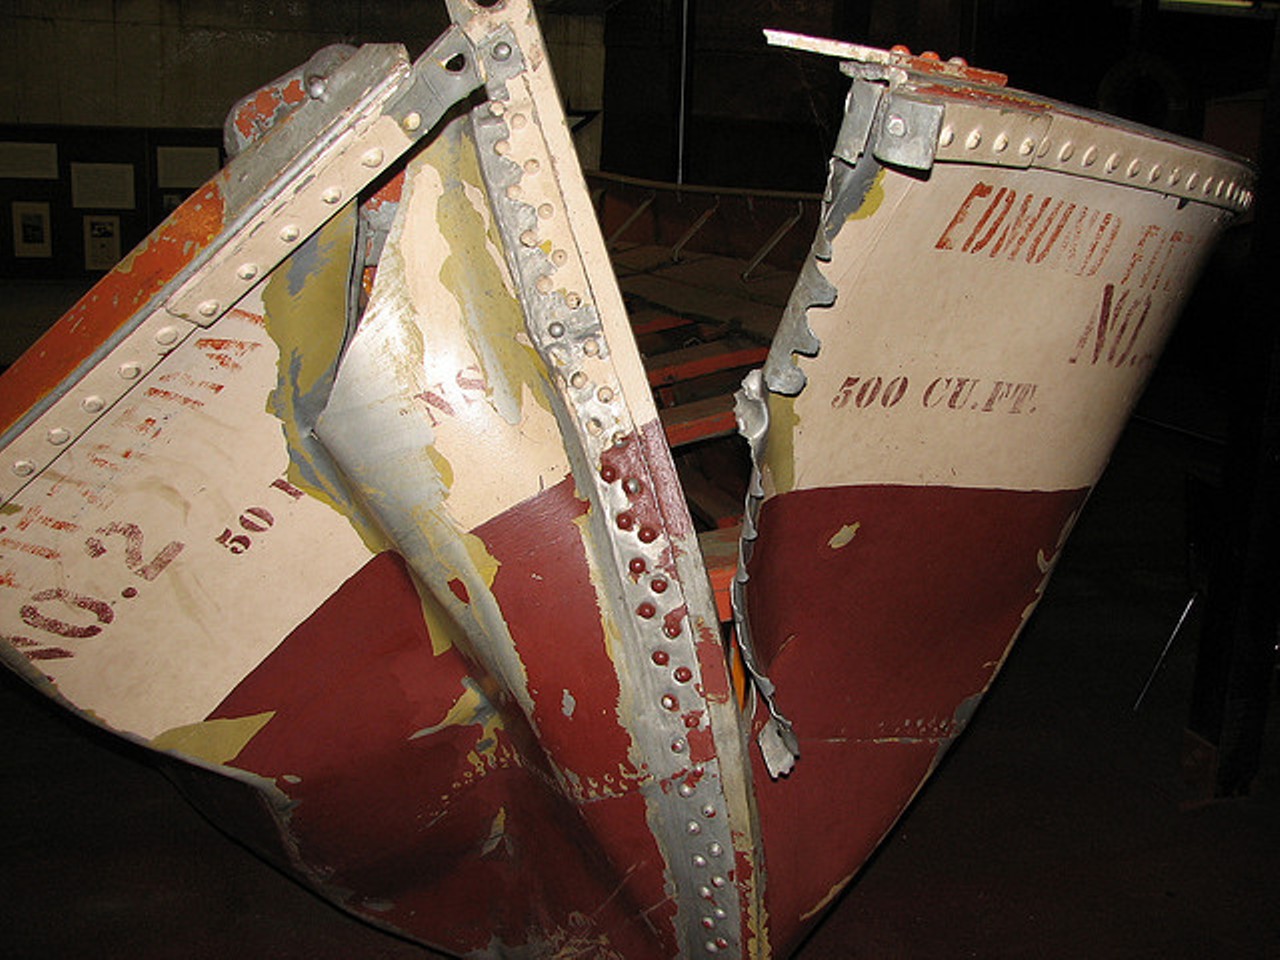 Wrecked life boats from Edmund Fitzgerald. Photo courtesy of Flickr Creative Commons user xray10